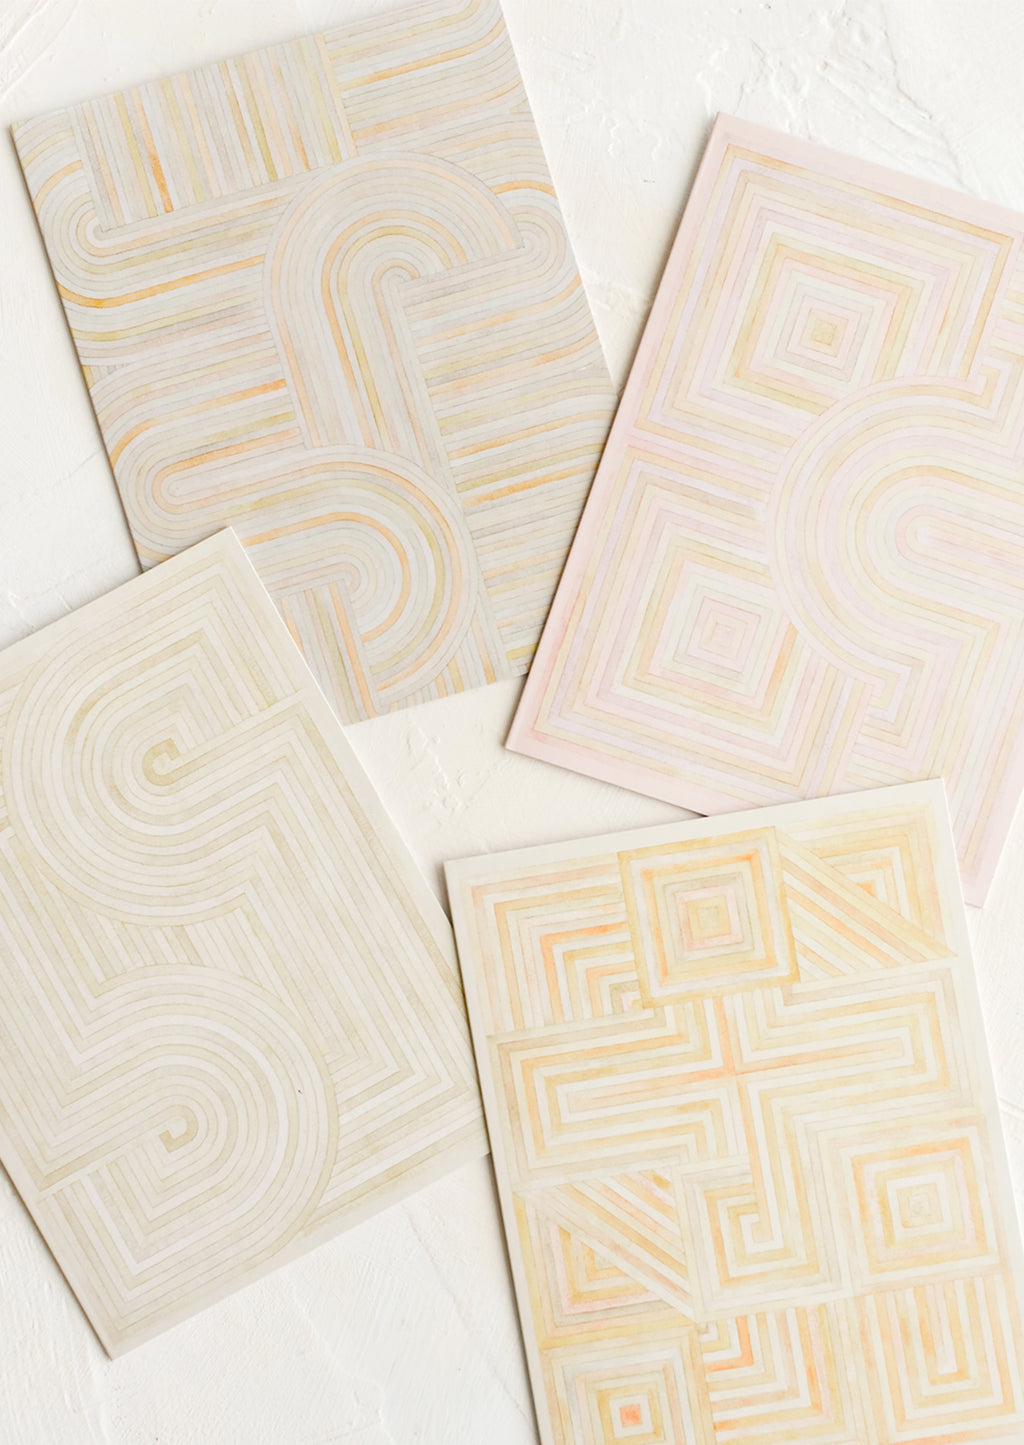 2: Four notecards with pastel geometric artwork design.